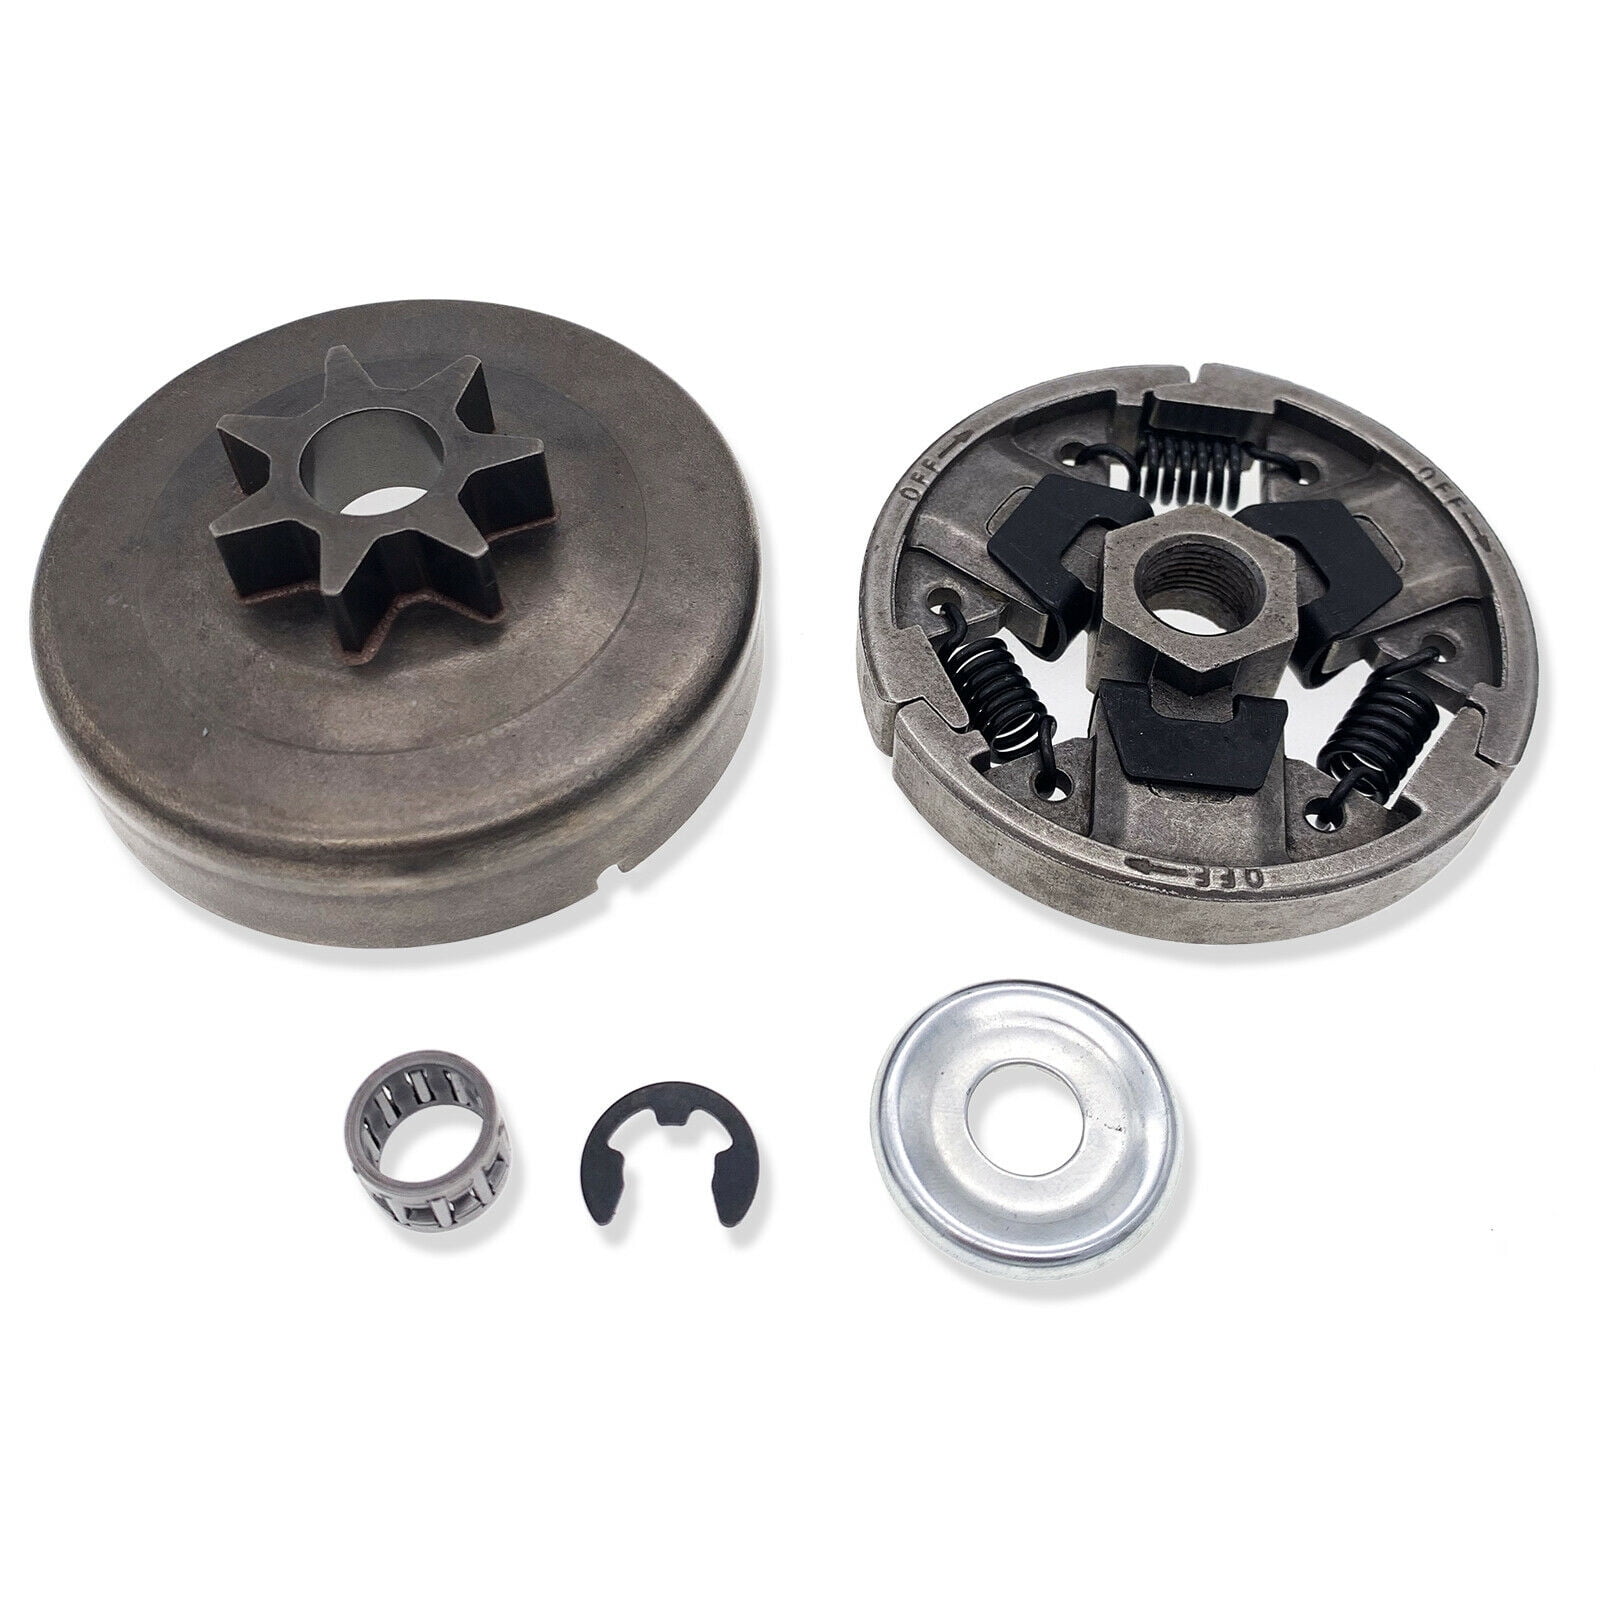 Spur Clutch Drum Kit For Stihl 026 MS260 024 MS240 PRO .325"-7T # 1121 640 2004 